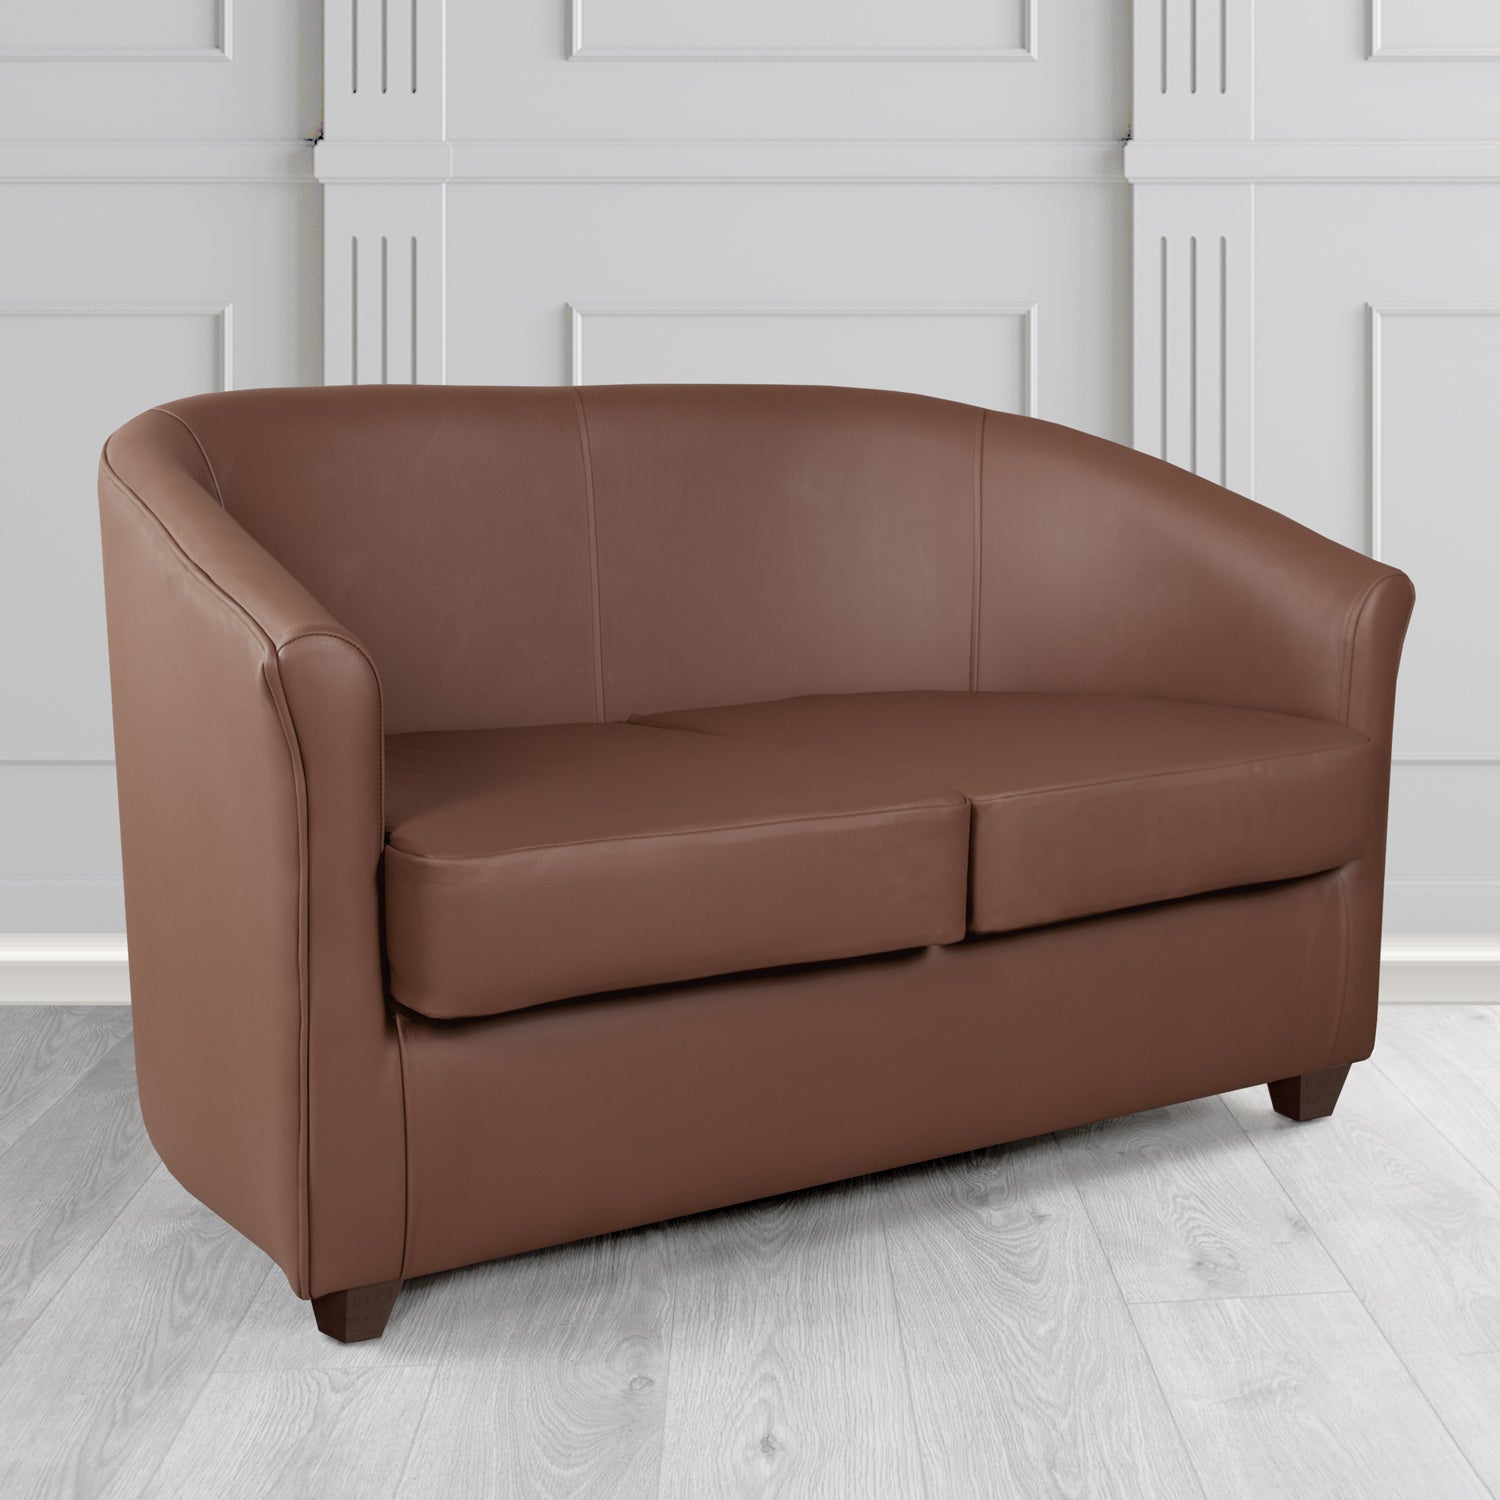 Cannes 2 Seater Tub Sofa in Chestnut Brown DCB Faux Leather